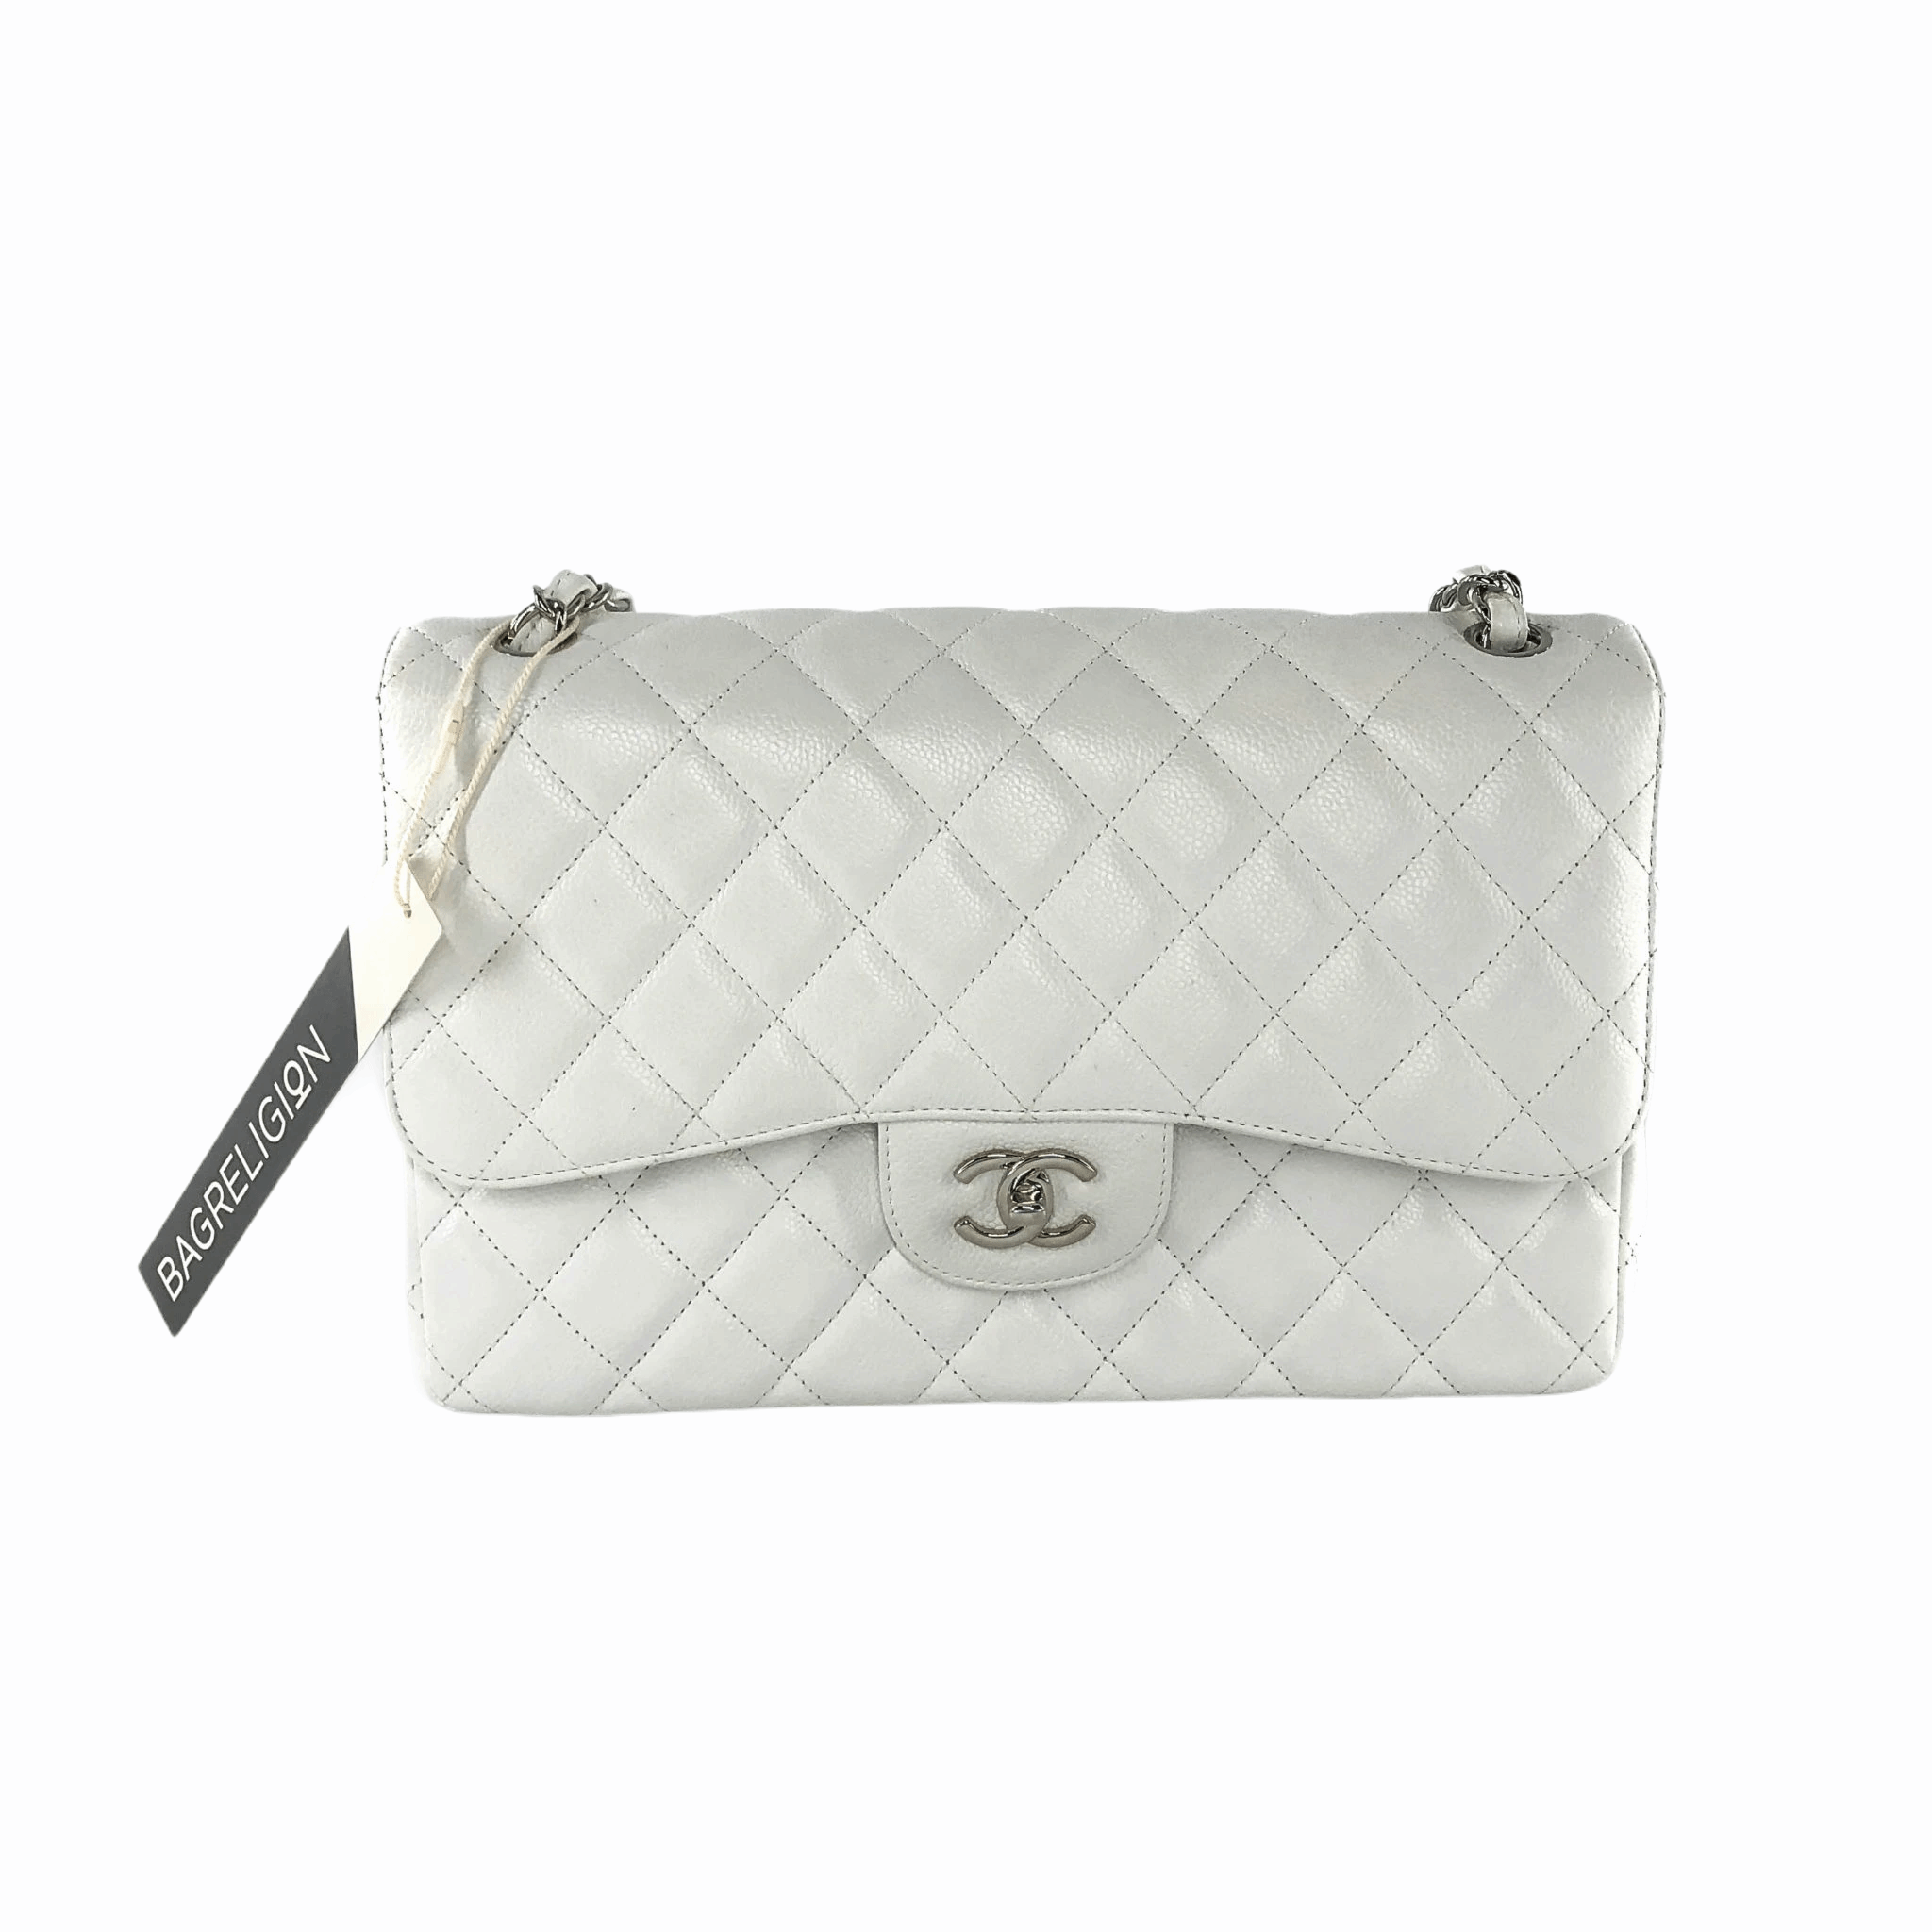 Chanel 21A white classic flap first impressions & review